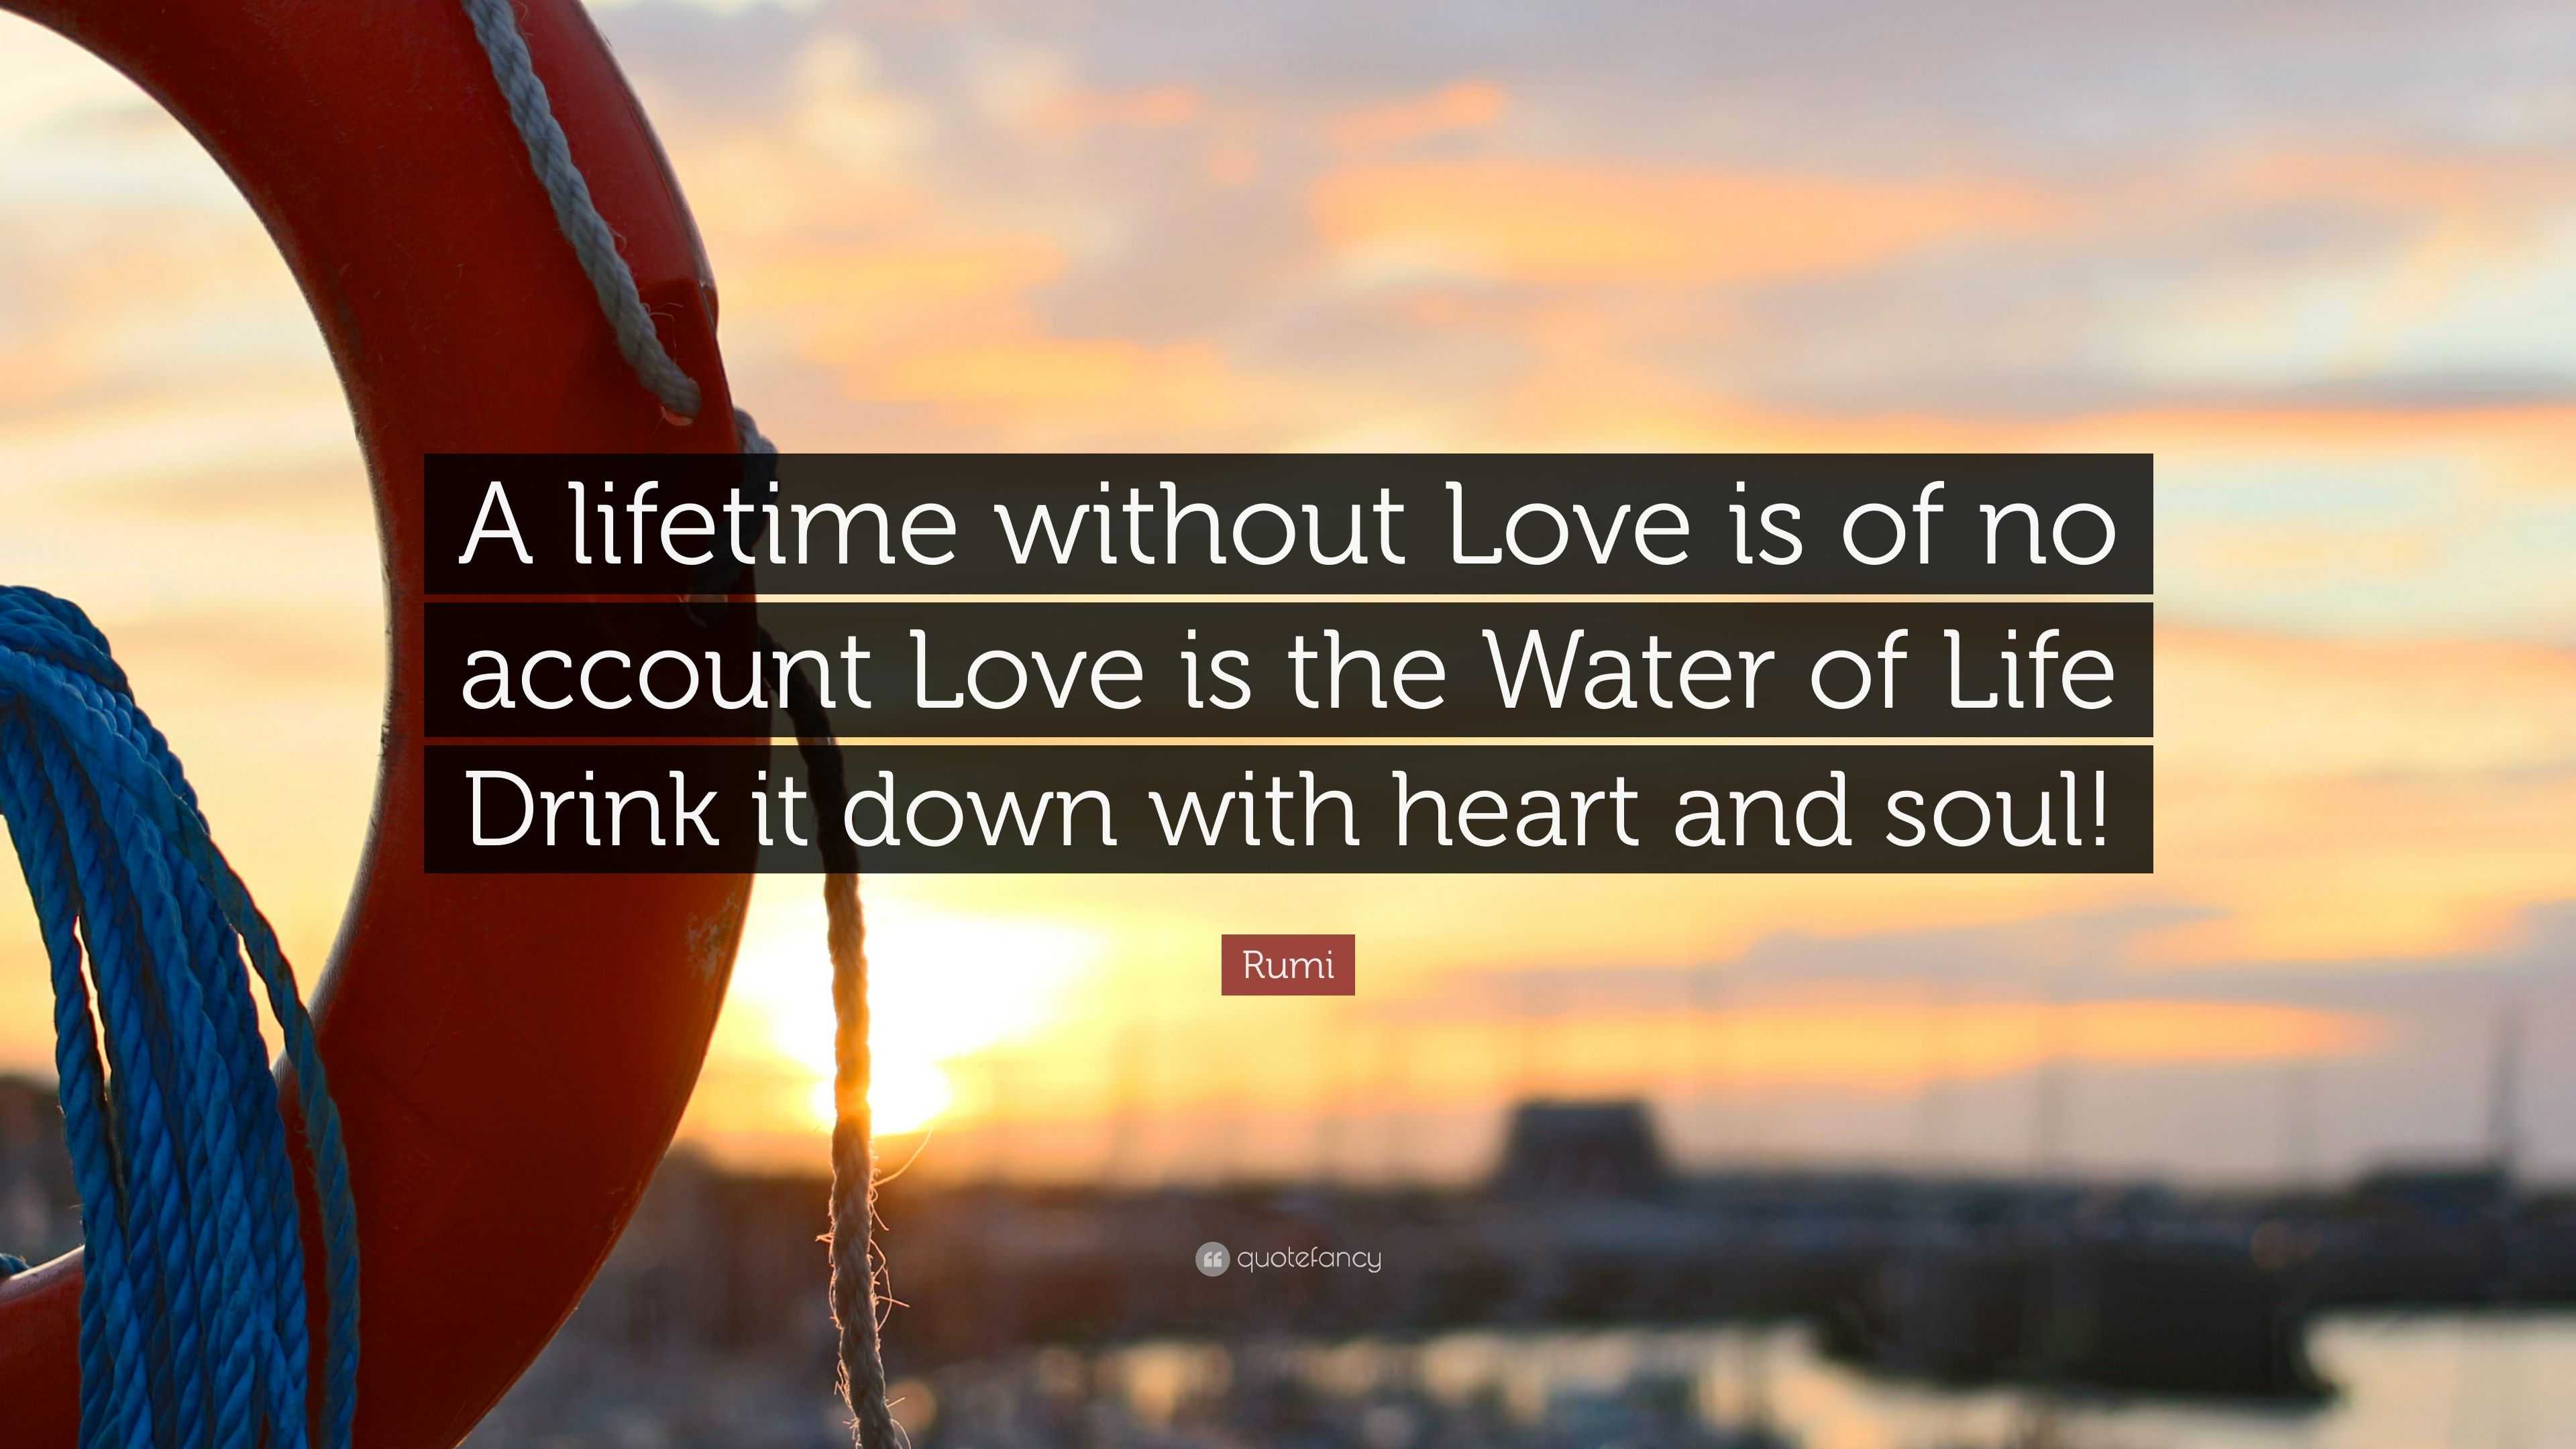 Rumi Quote “A lifetime without Love is of no account Love is the Water